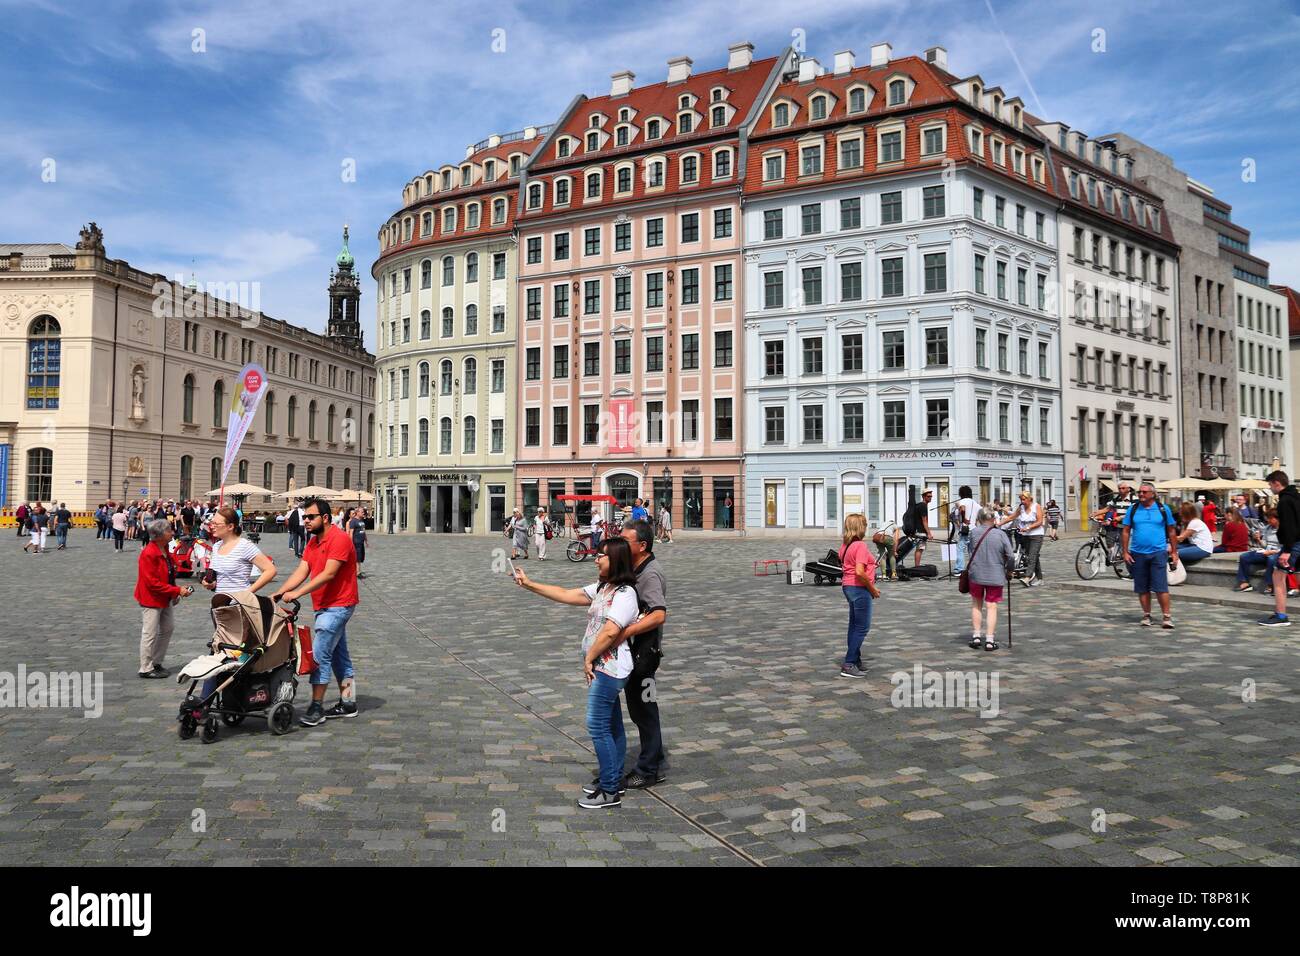 DRESDEN, GERMANY - MAY 10, 2018: People visit Neumarkt square in Altstadt (Old Town) district of Dresden, the 12th biggest city in Germany. Stock Photo